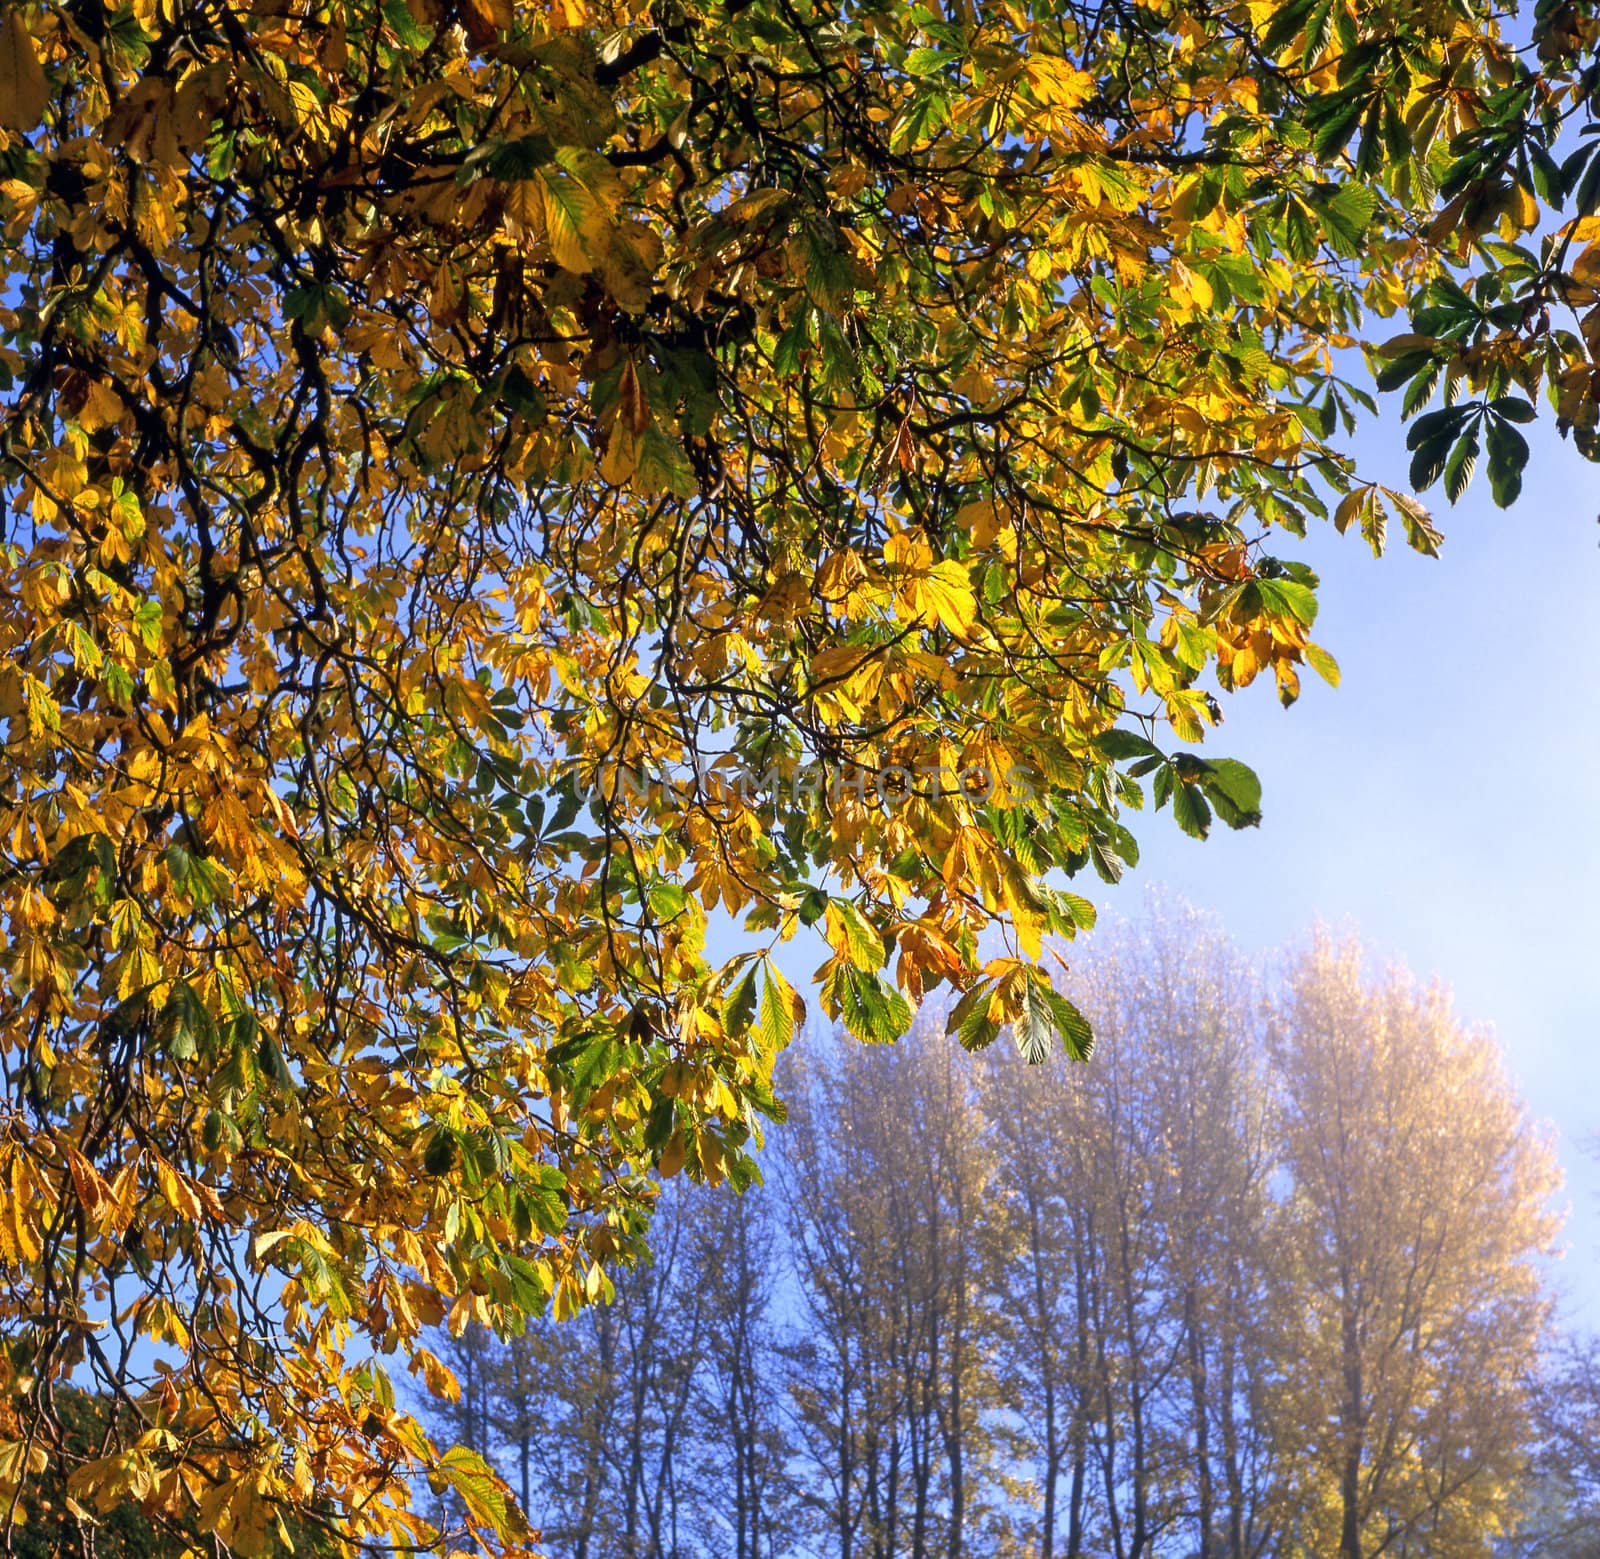 Golden Autumn leaves on trees just before the fall by runamock